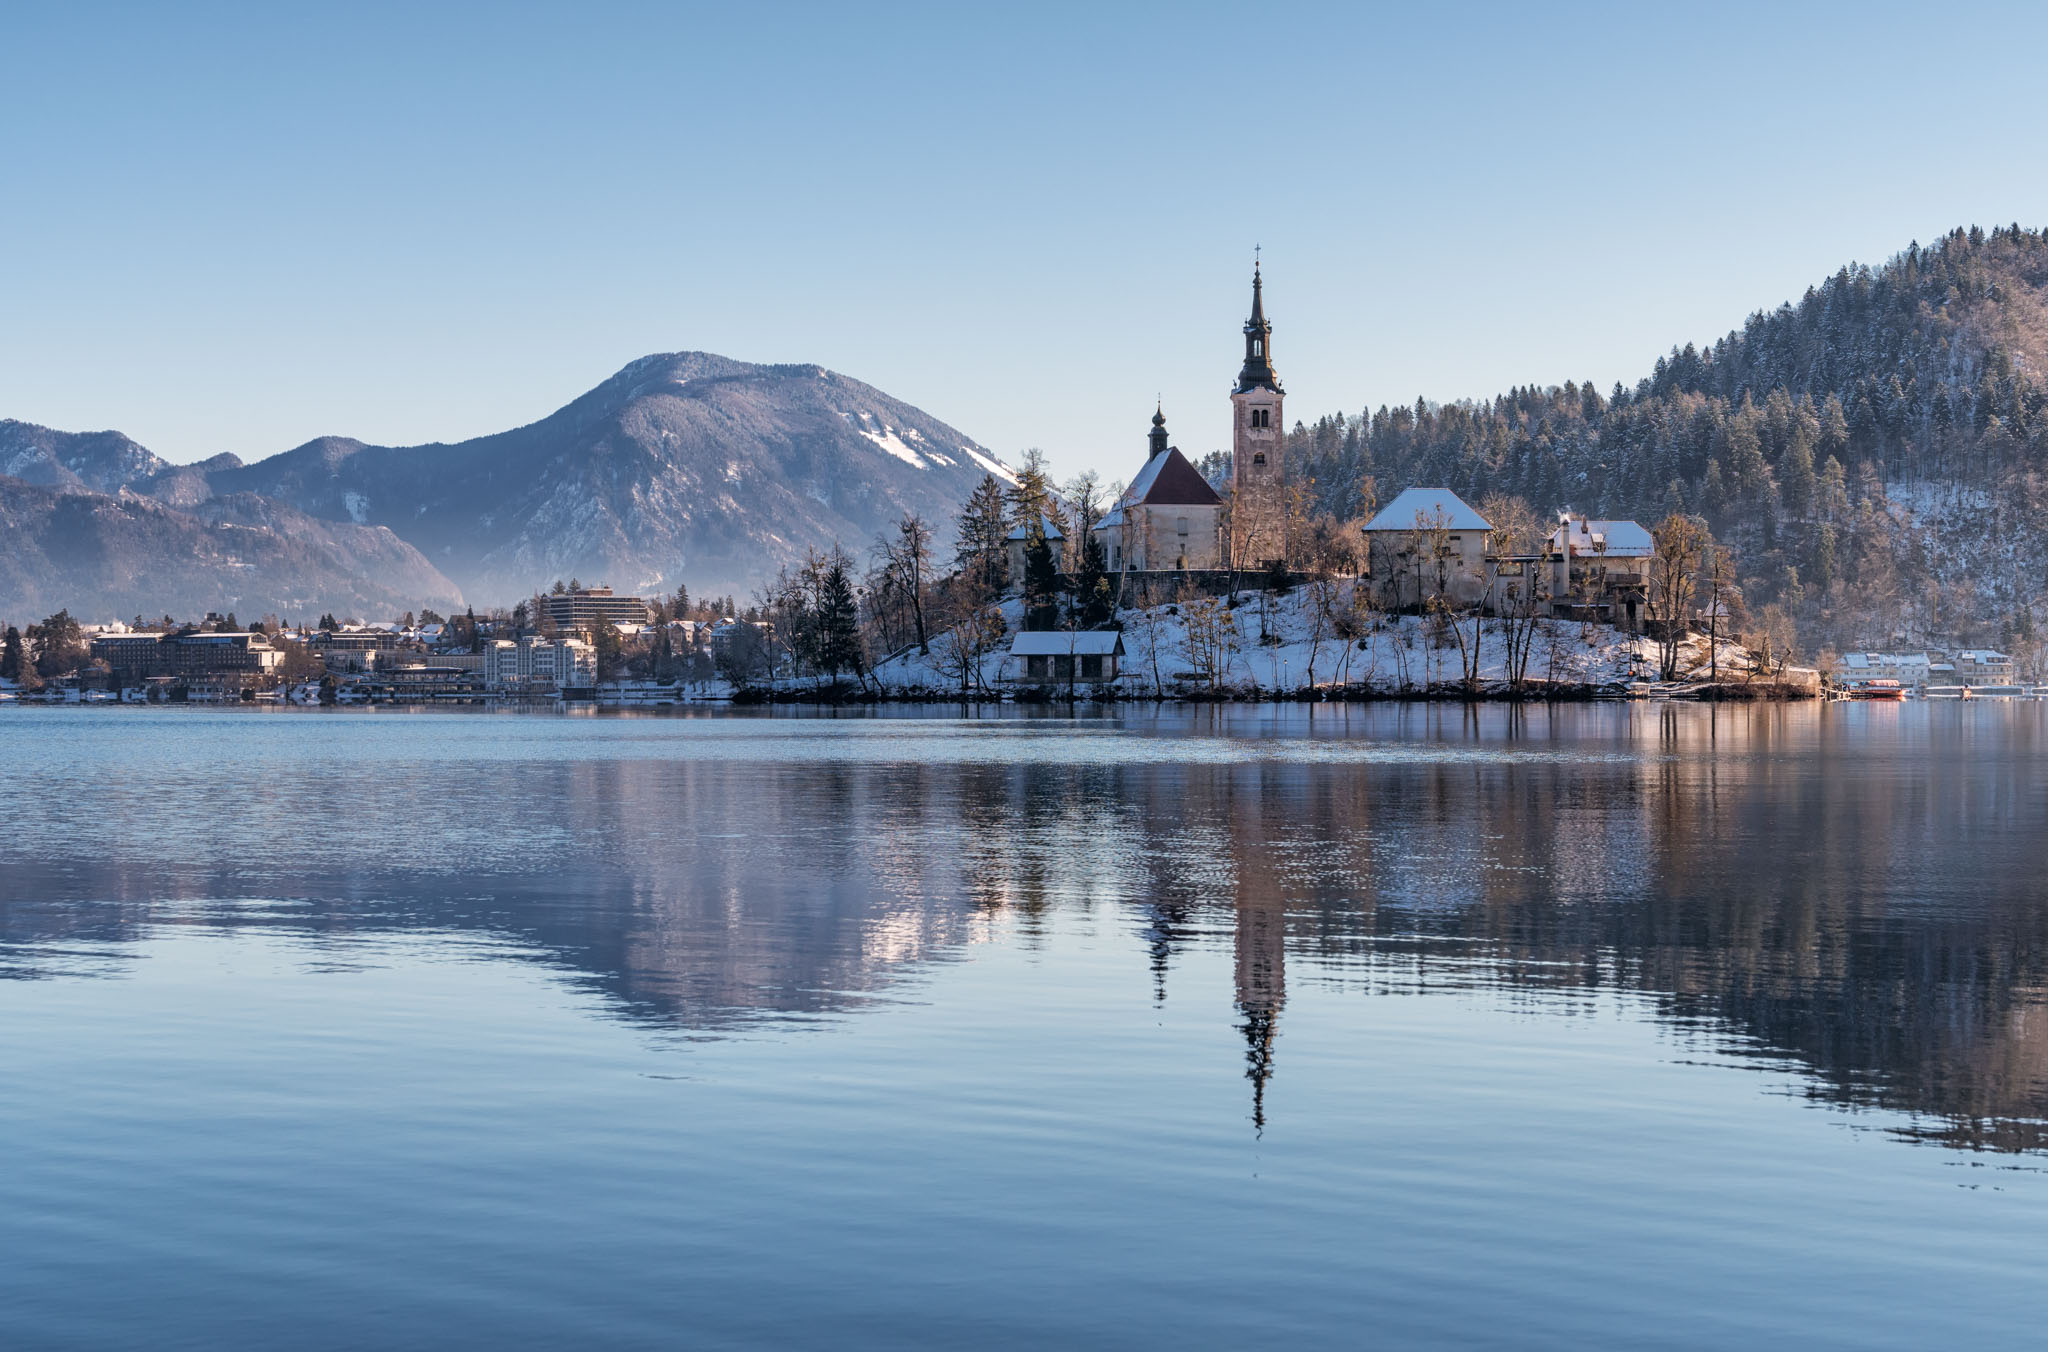 General 2048x1352 architecture house church building Lake Bled Slovenia island mountains winter snow trees lake forest hills reflection water nature landscape